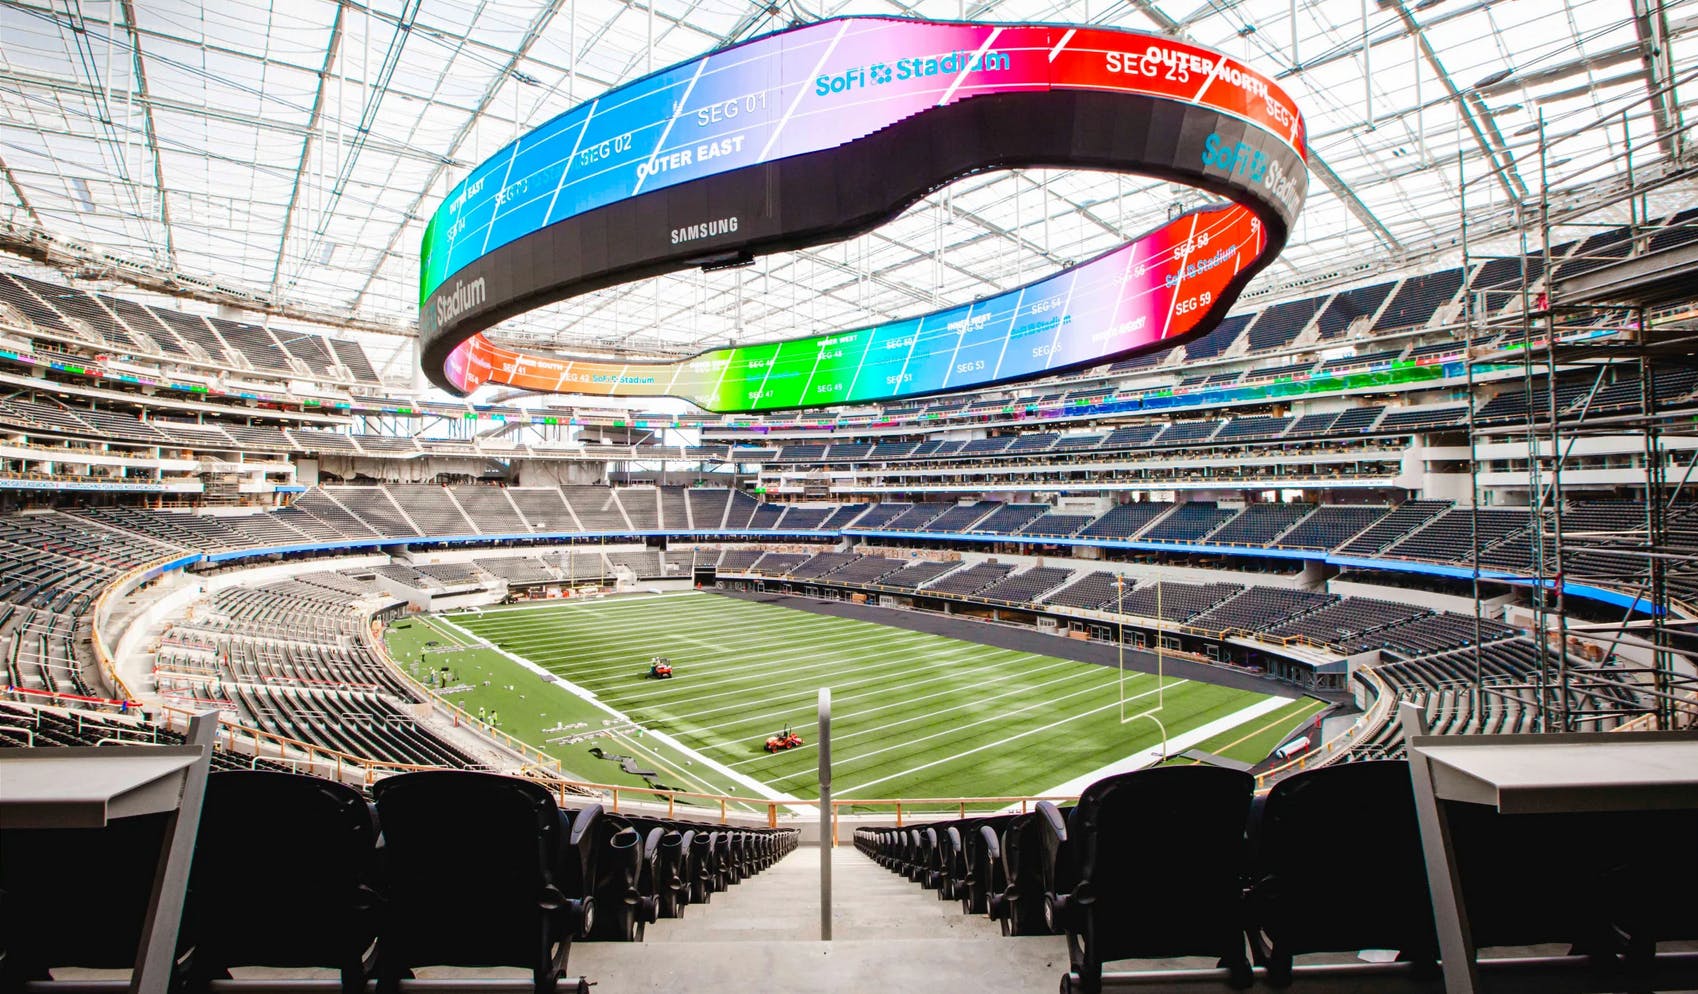 A technological wonder: How Samsung and SoFi Stadium changed the